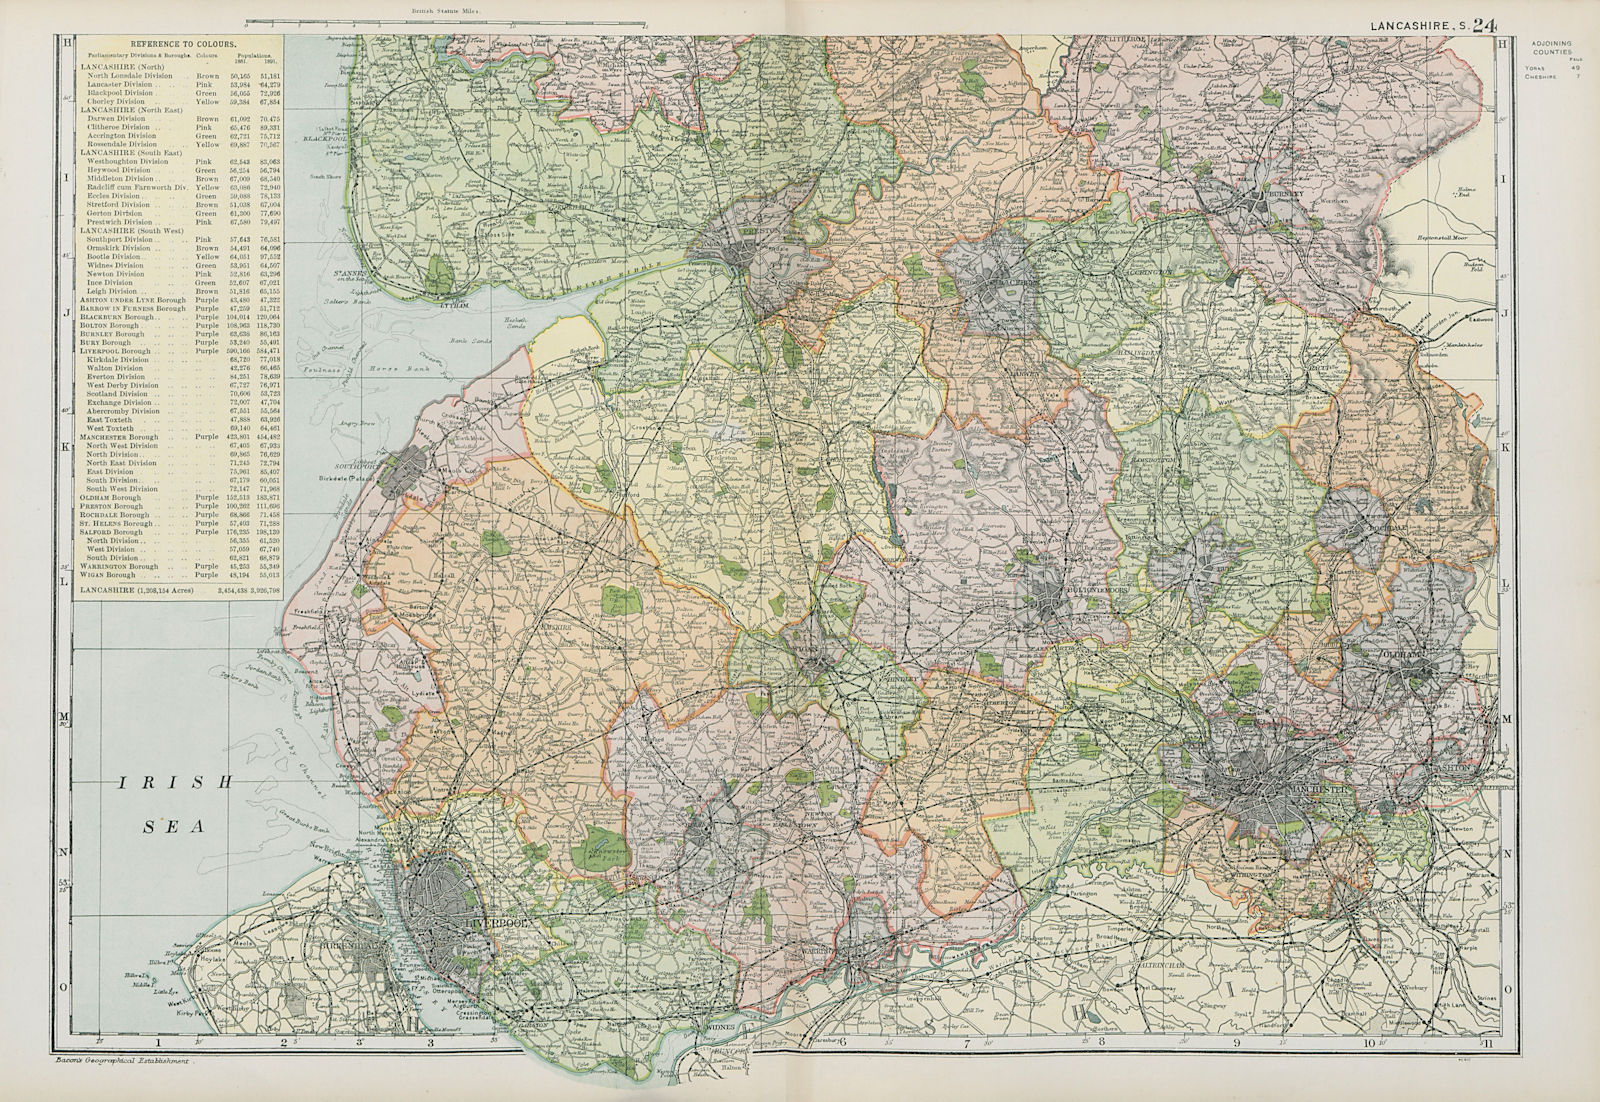 LANCASHIRE (SOUTH) . Showing Parliamentary divisions & parks. BACON 1900 map